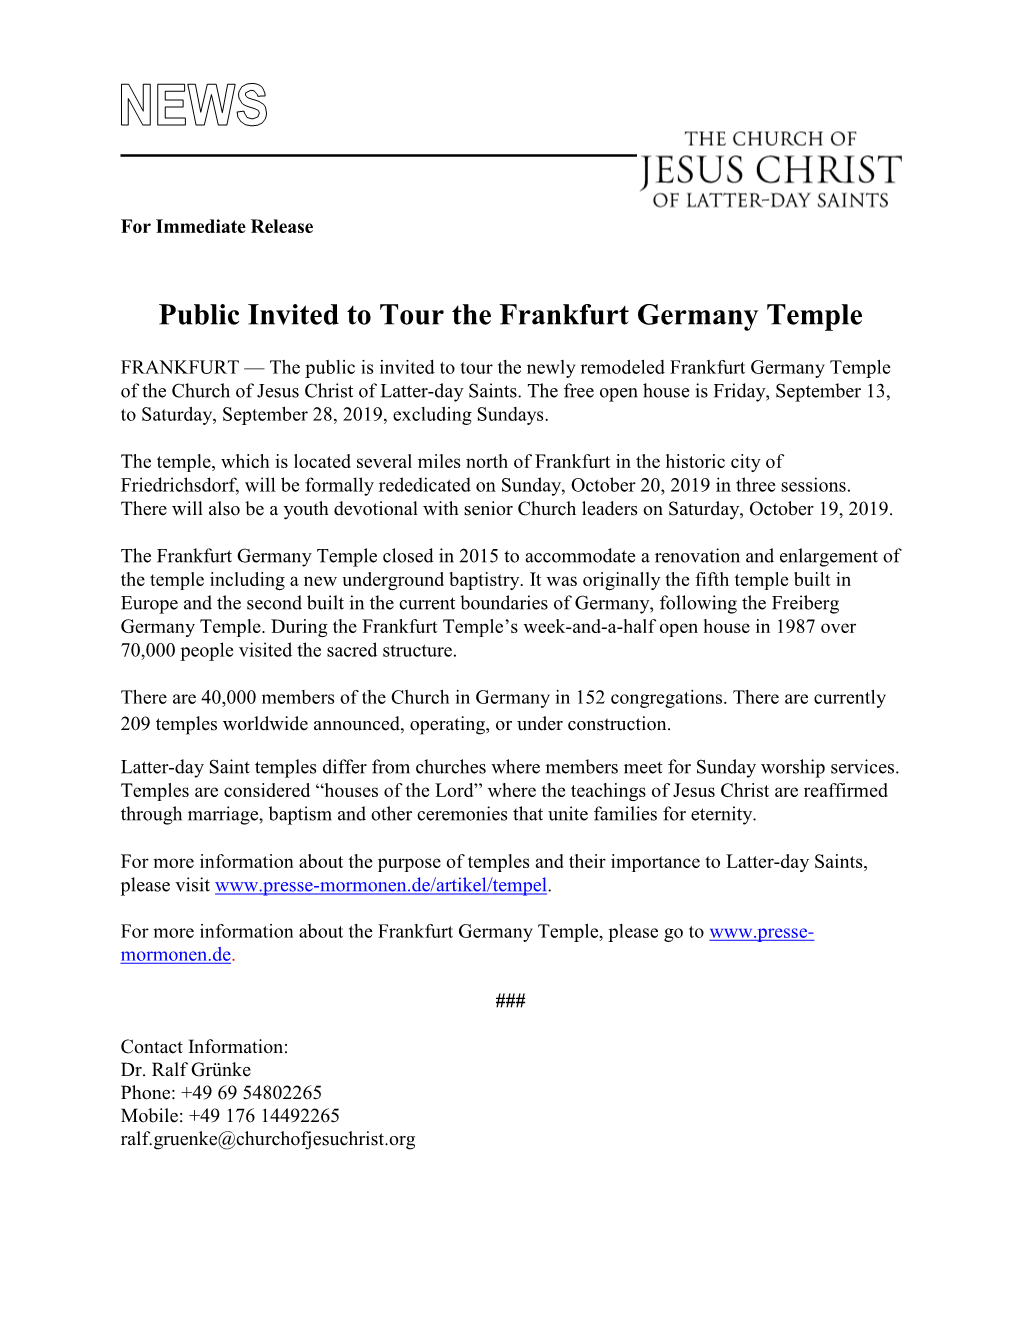 Public Invited to Tour the Frankfurt Germany Temple